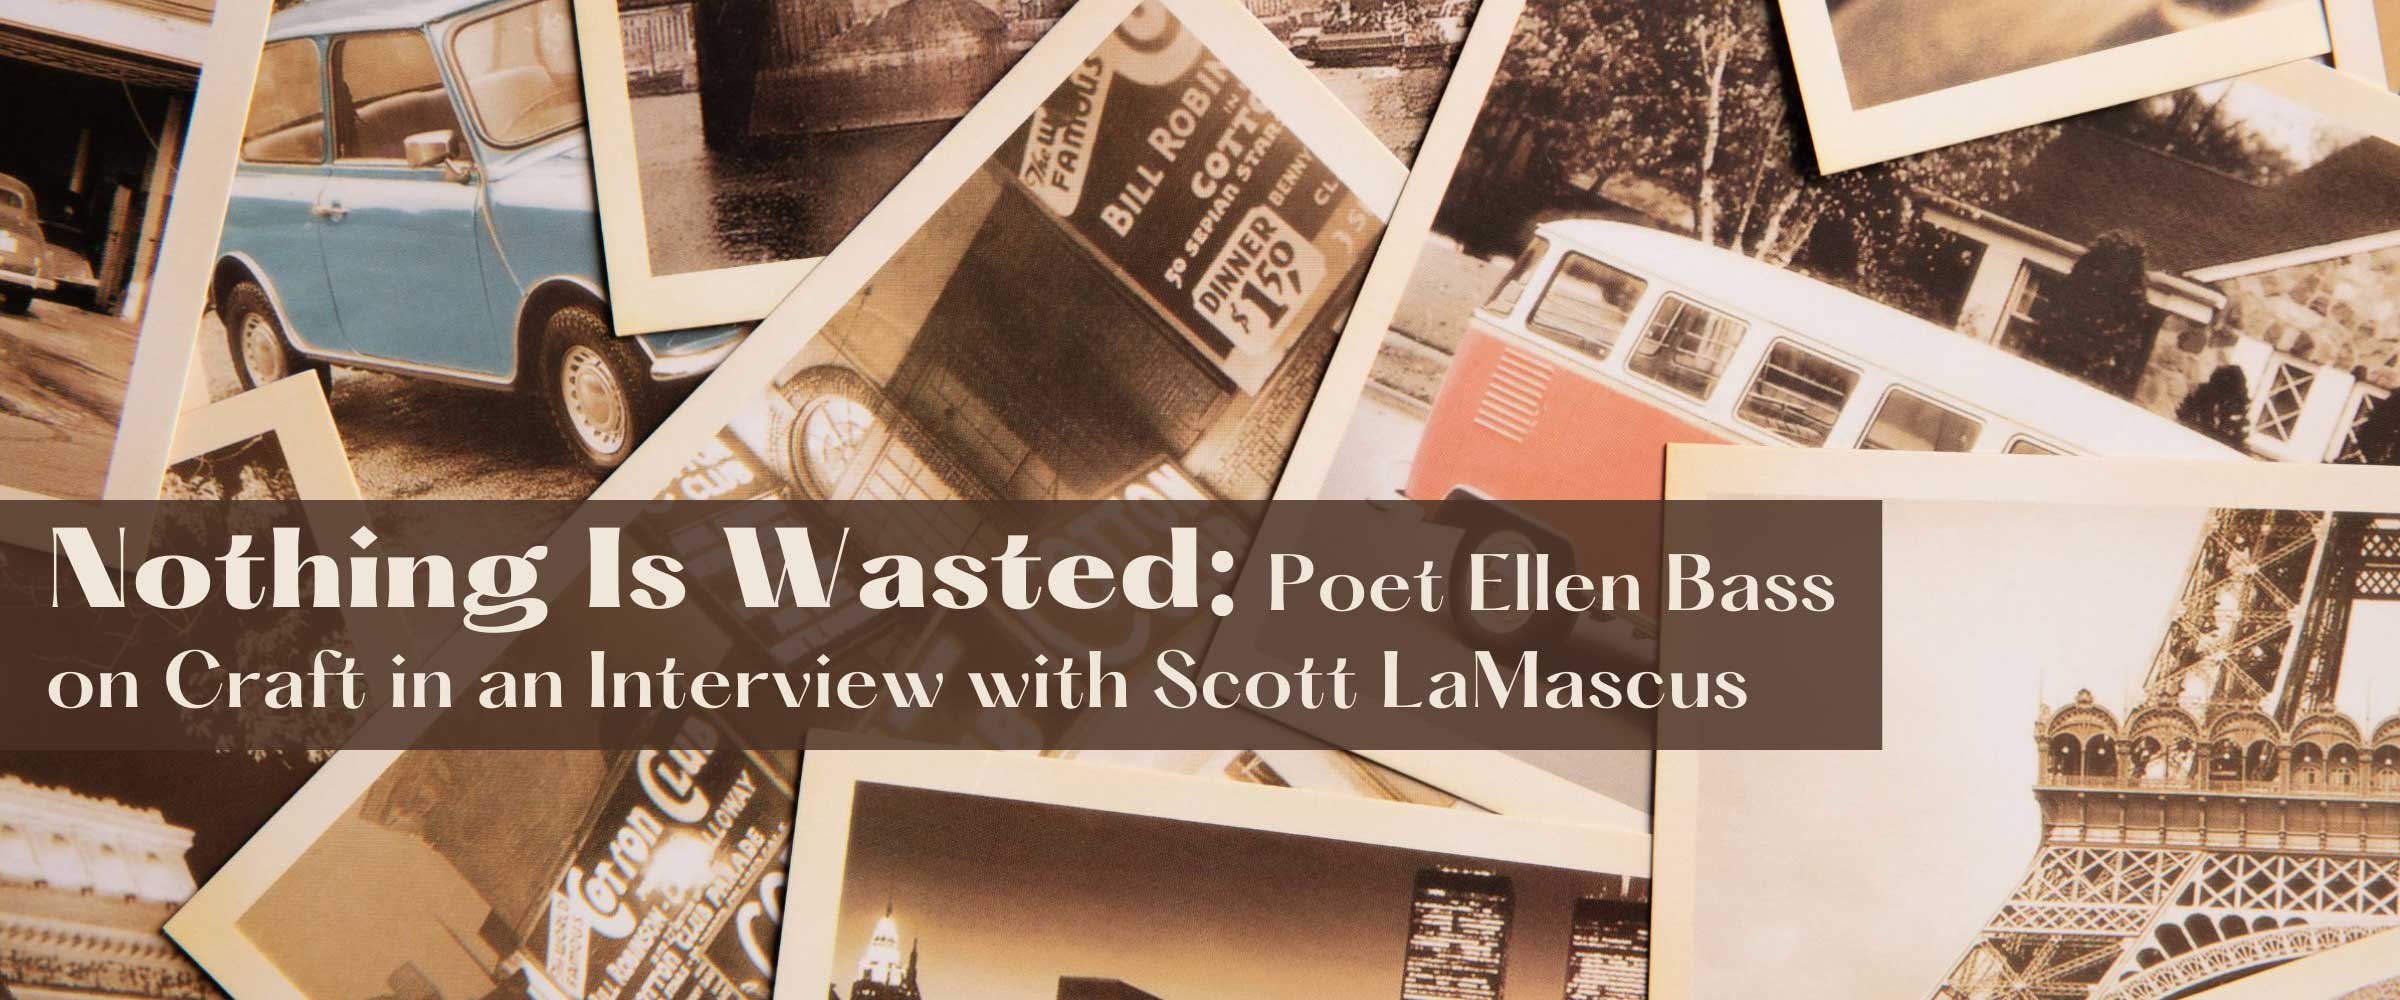 Nothing is Wasted: Poet Ellen Bass on Craft, Interviewed by Scott LaMascus